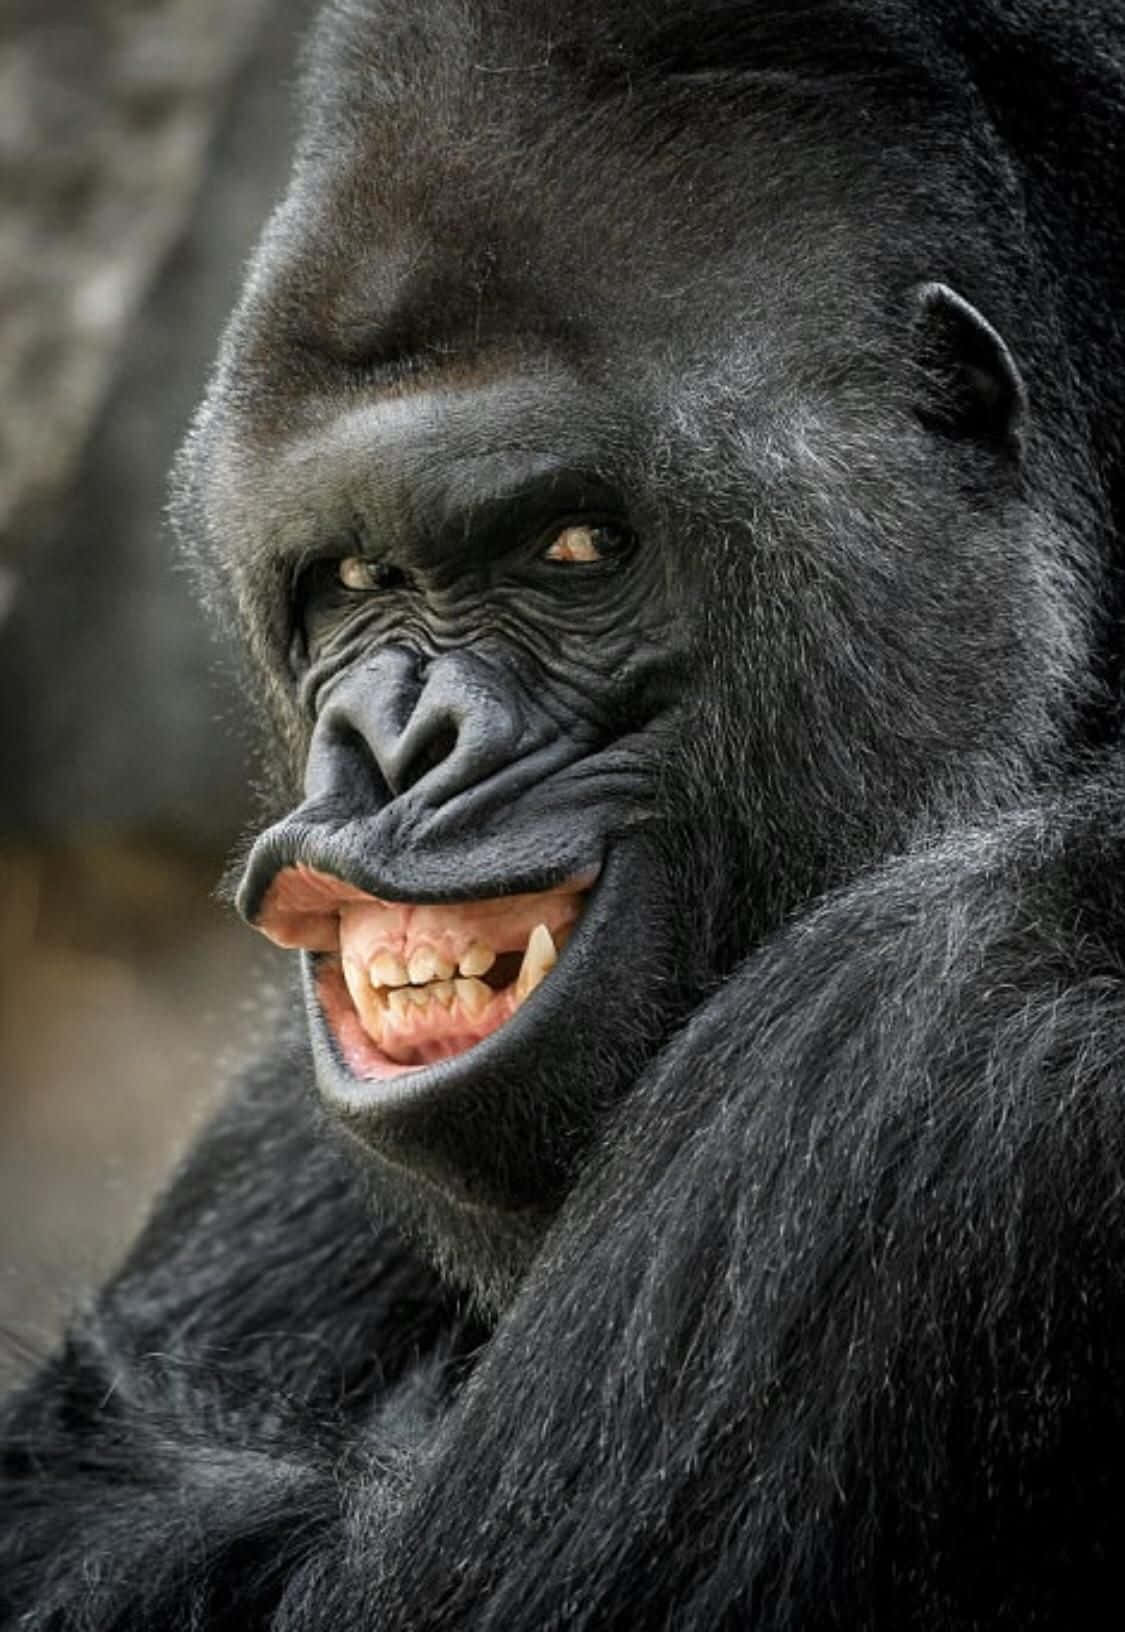 Giant Funny Gorilla Grinning Pictures